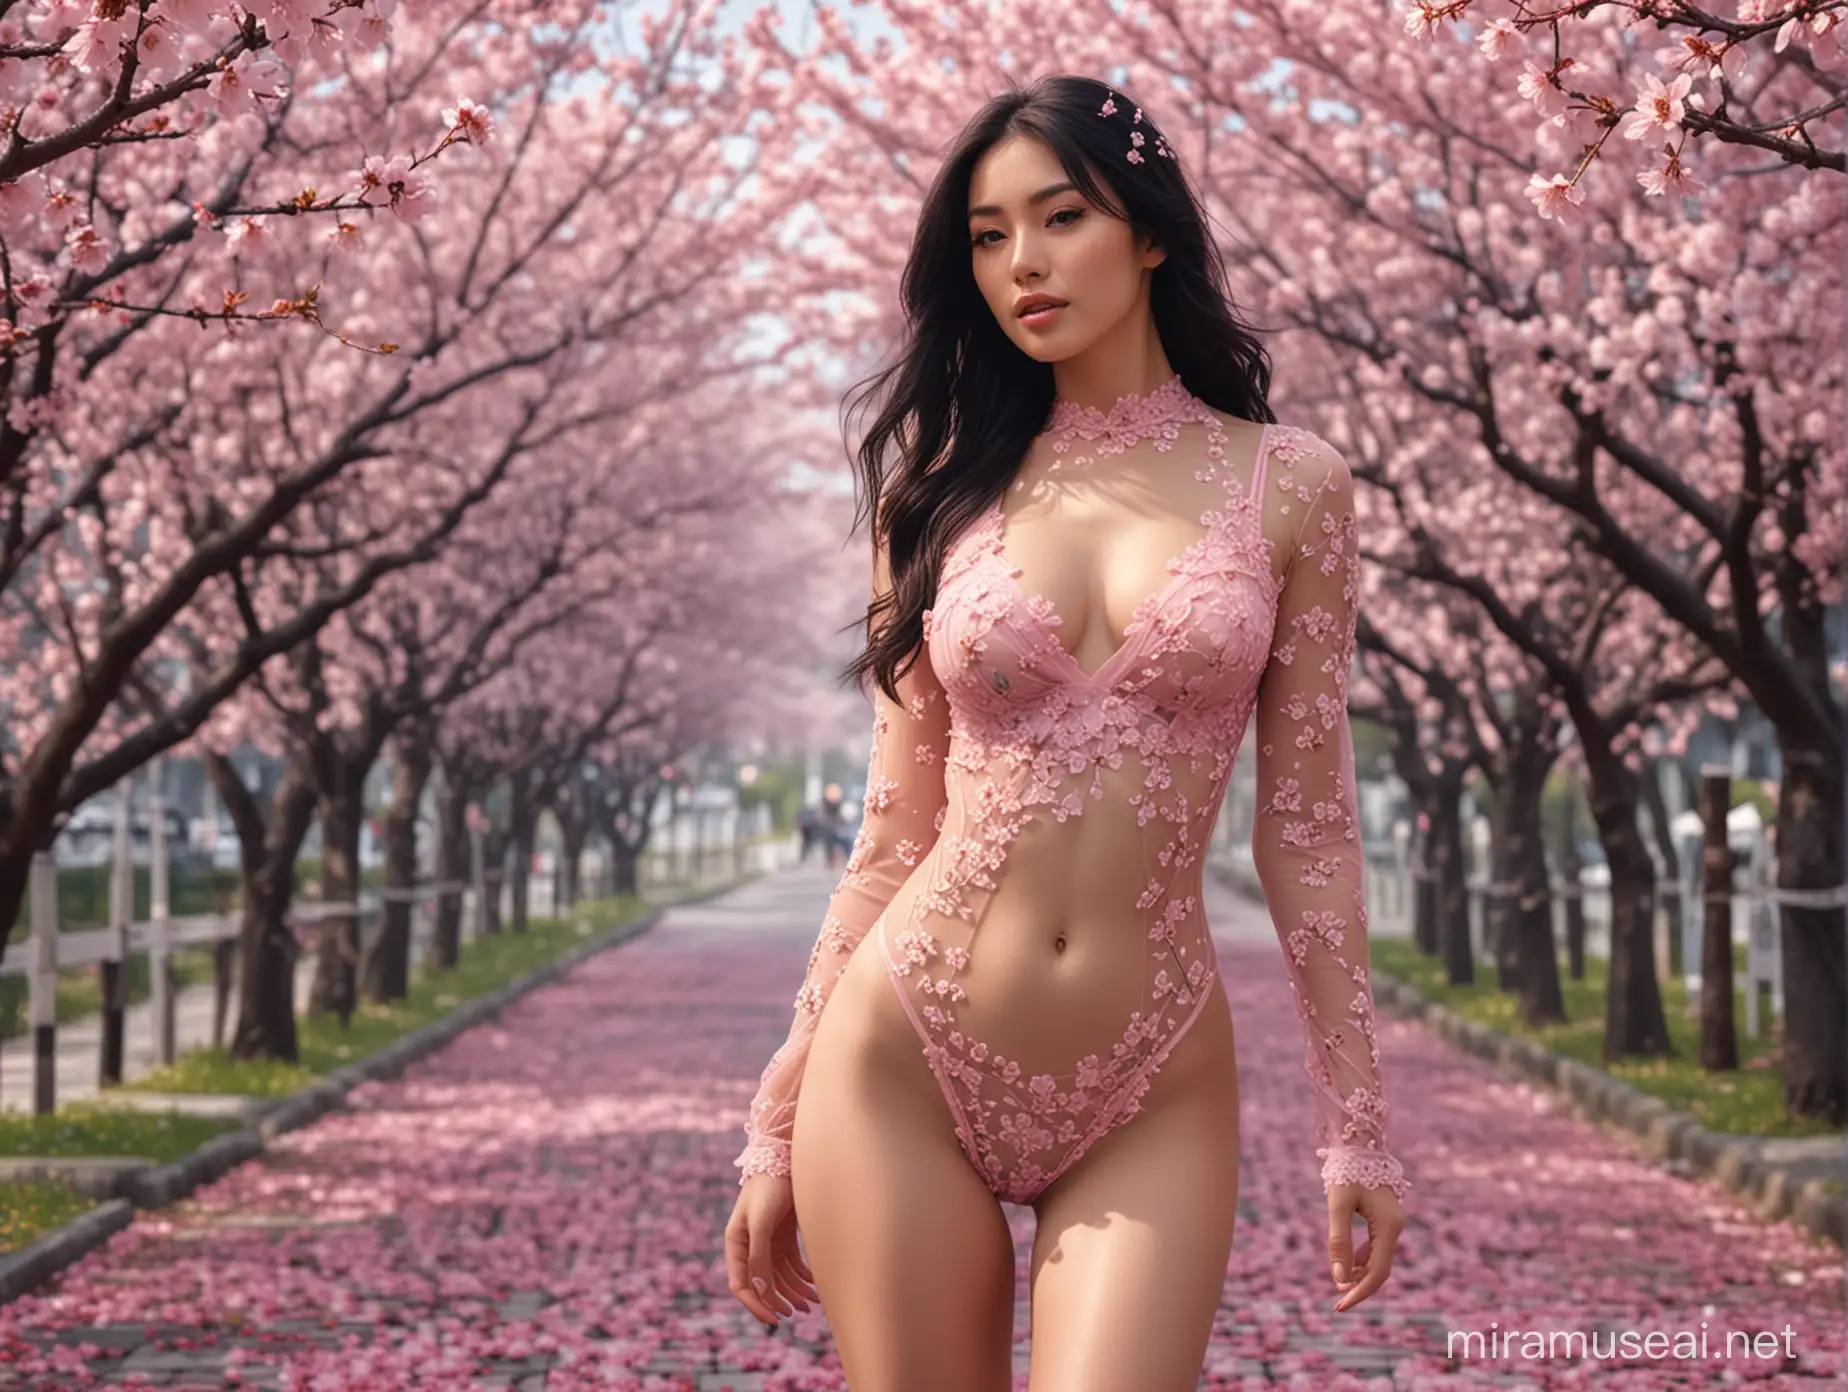 Sakura Japan cherry blossom in flower with leading lines, beautiful Gorgeous pretty tall woman with long black hair among cherry blossom trees, wears a pink transparent lace bodysuit, made of cherry blossom petals , image Hyper realistic UHD, Photo Pro hyper detailed, 8K.